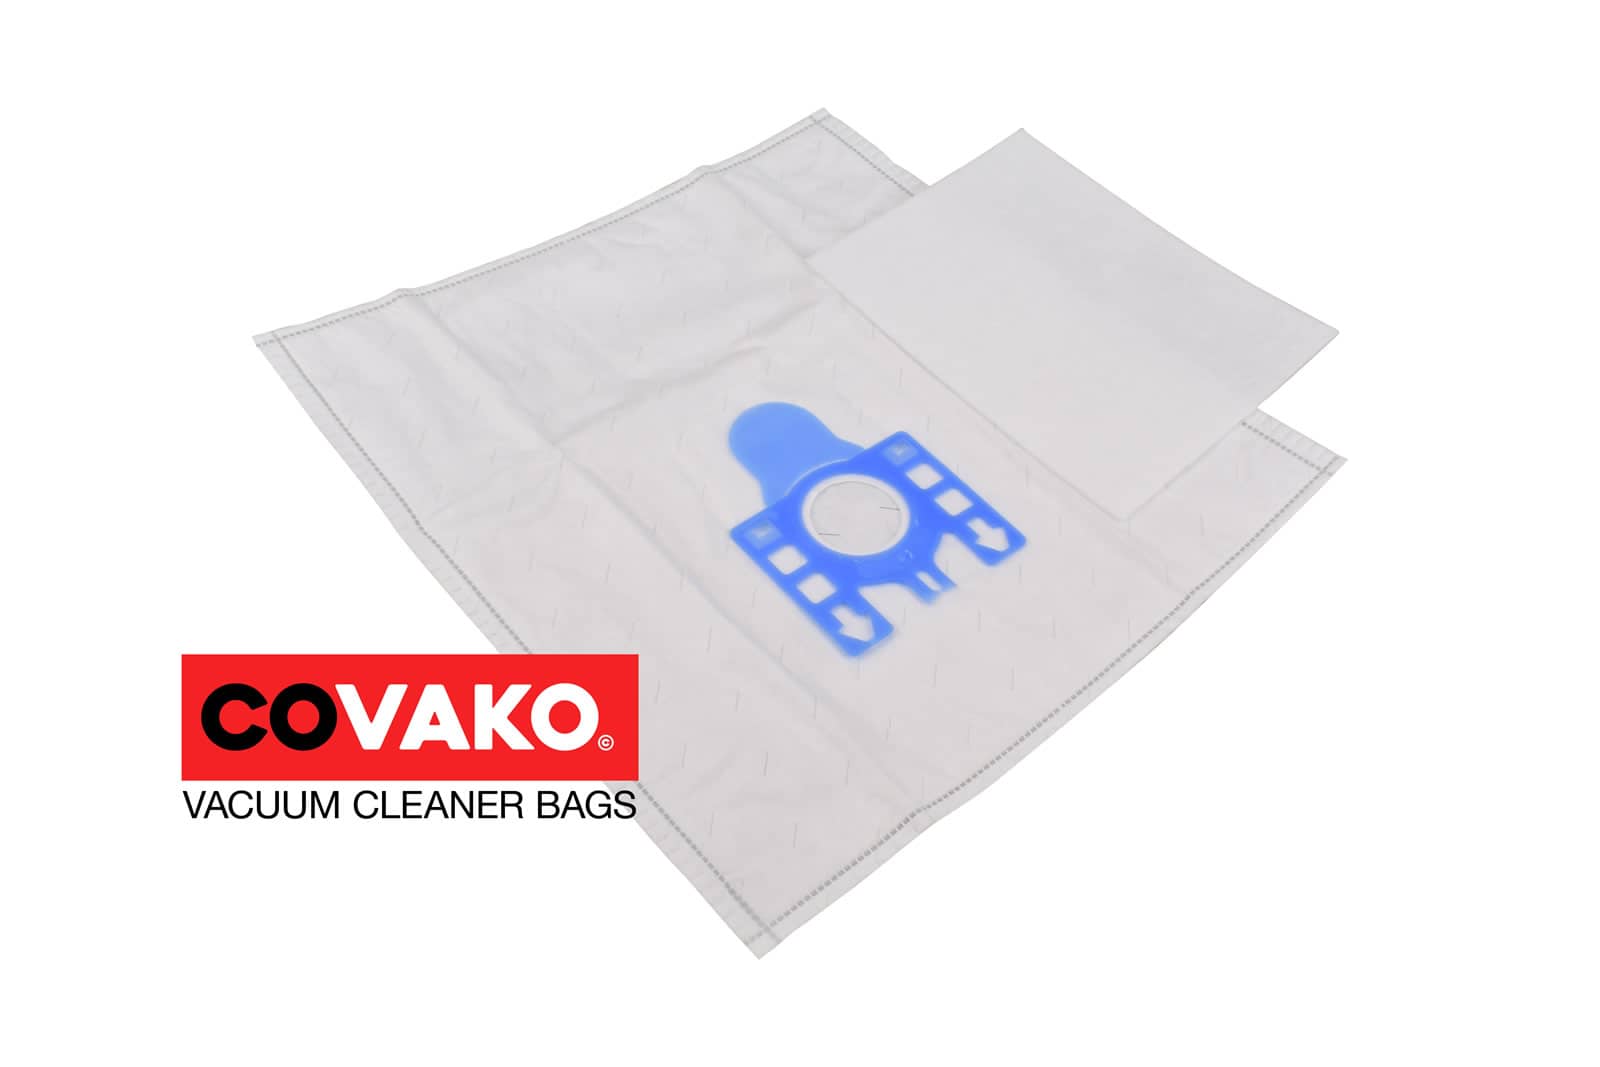 Electrolux CE Azzurro-Vampyr / Synthesis - Electrolux vacuum cleaner bags